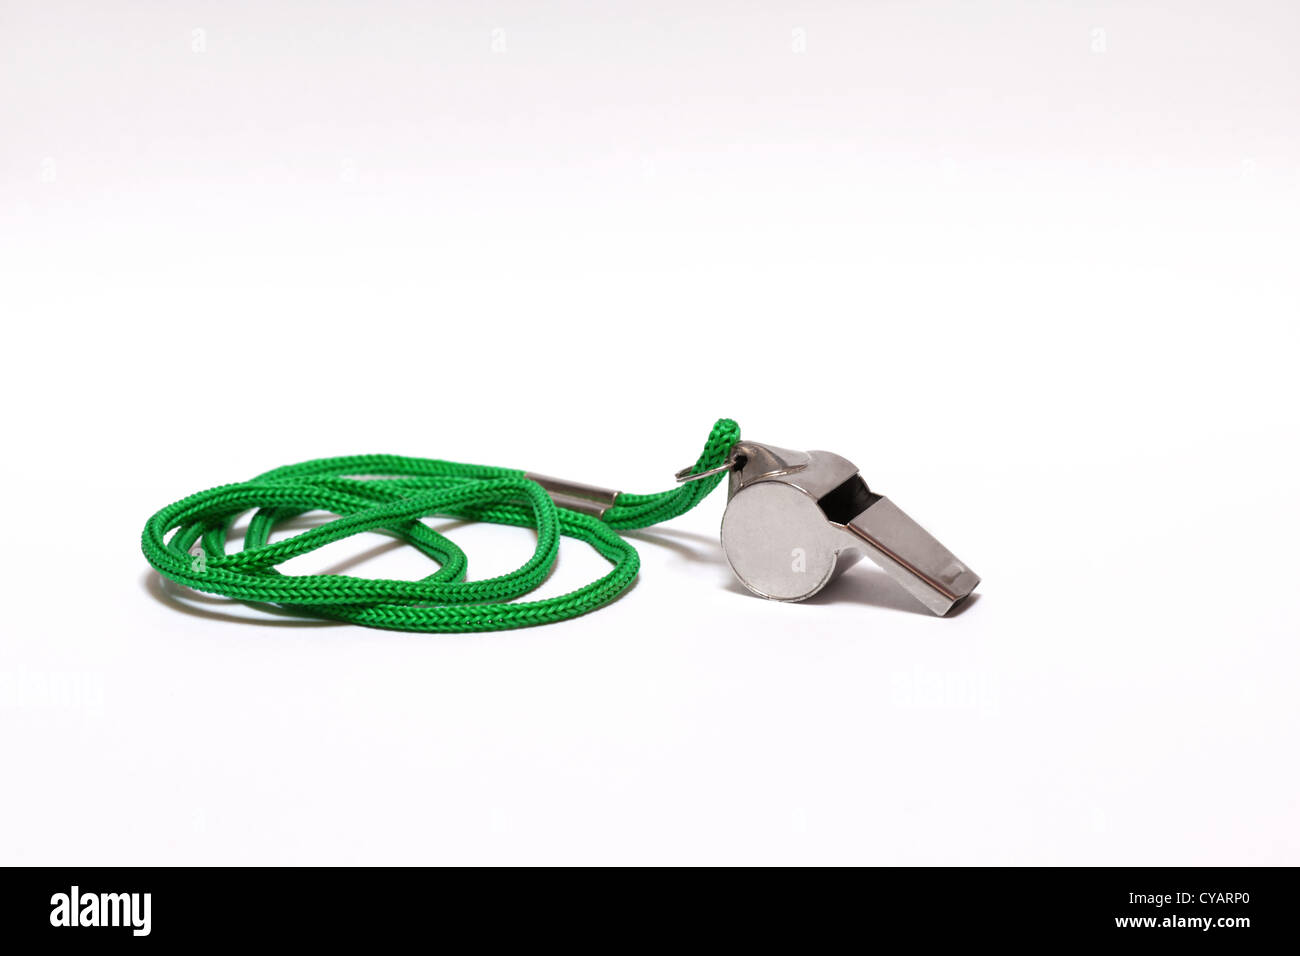 Pea whistle with a green string on white background Stock Photo